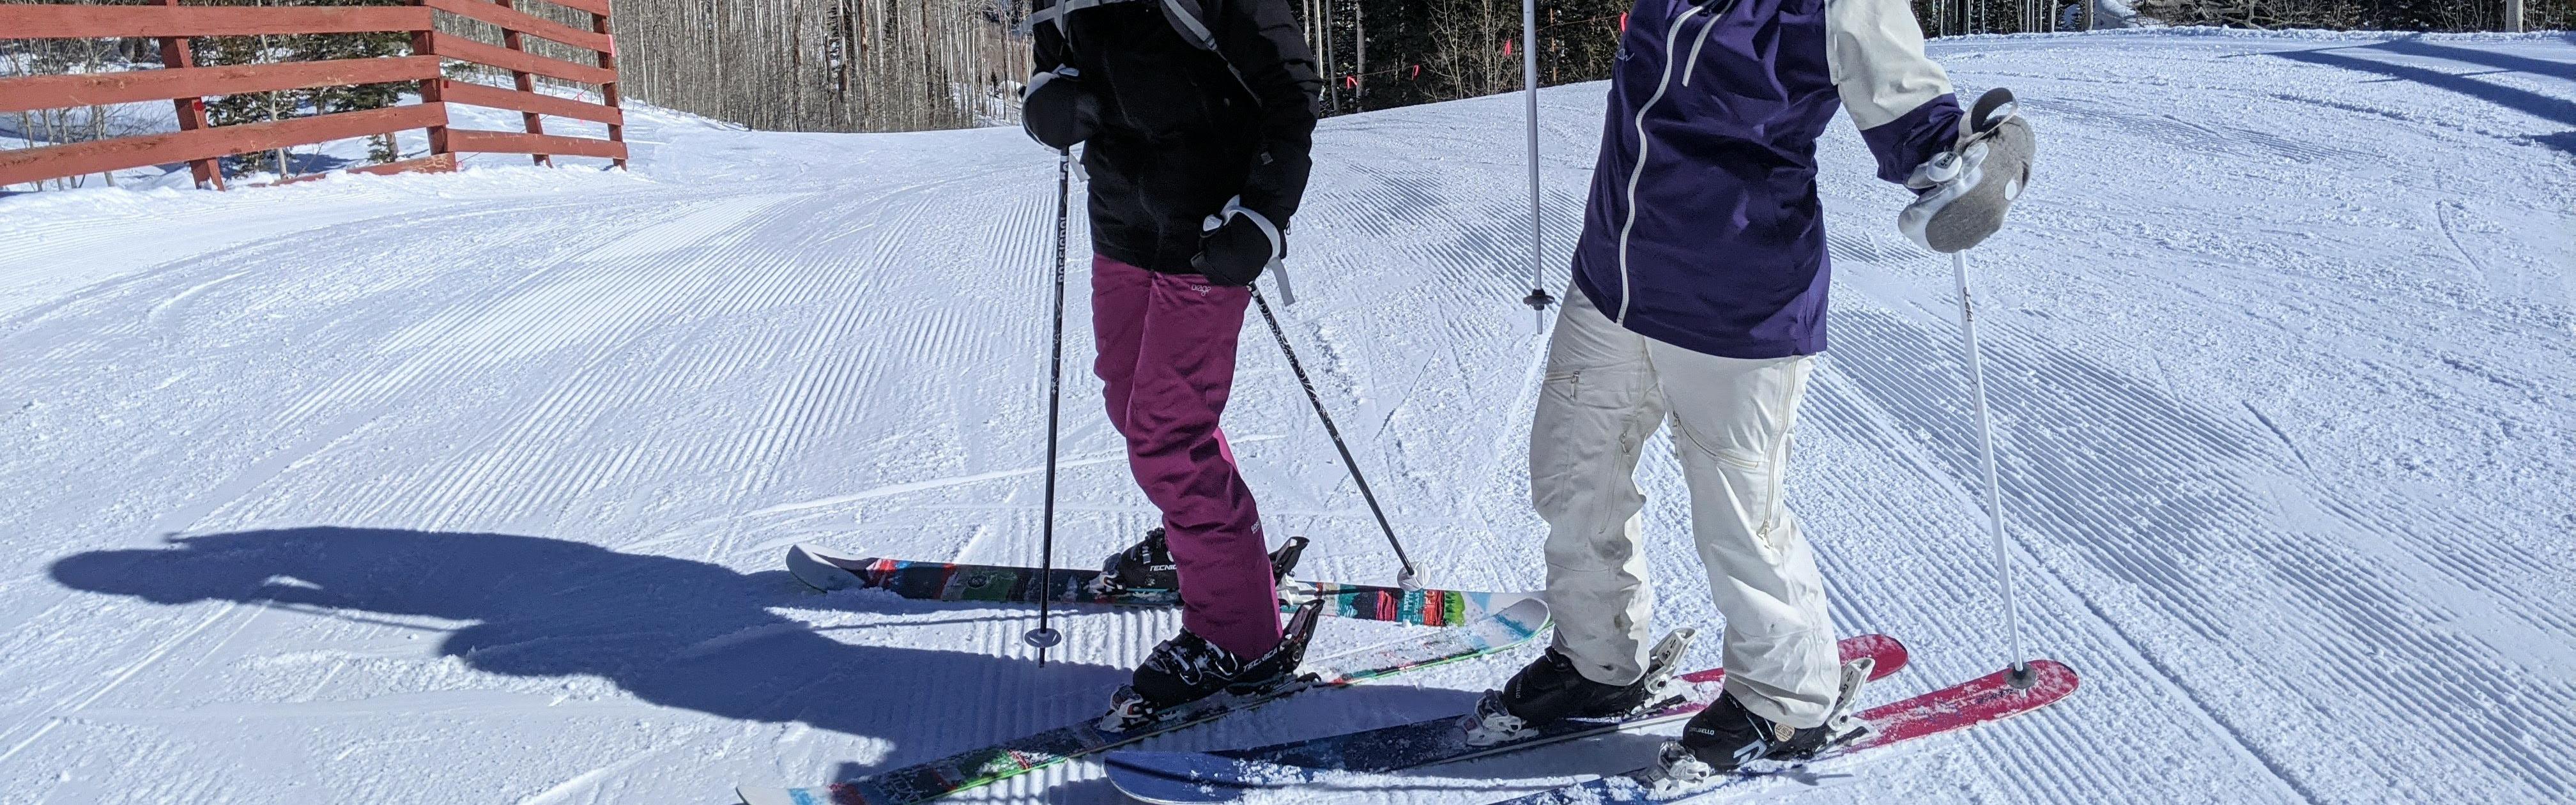 Two skiers standing on a groomed ski run. 